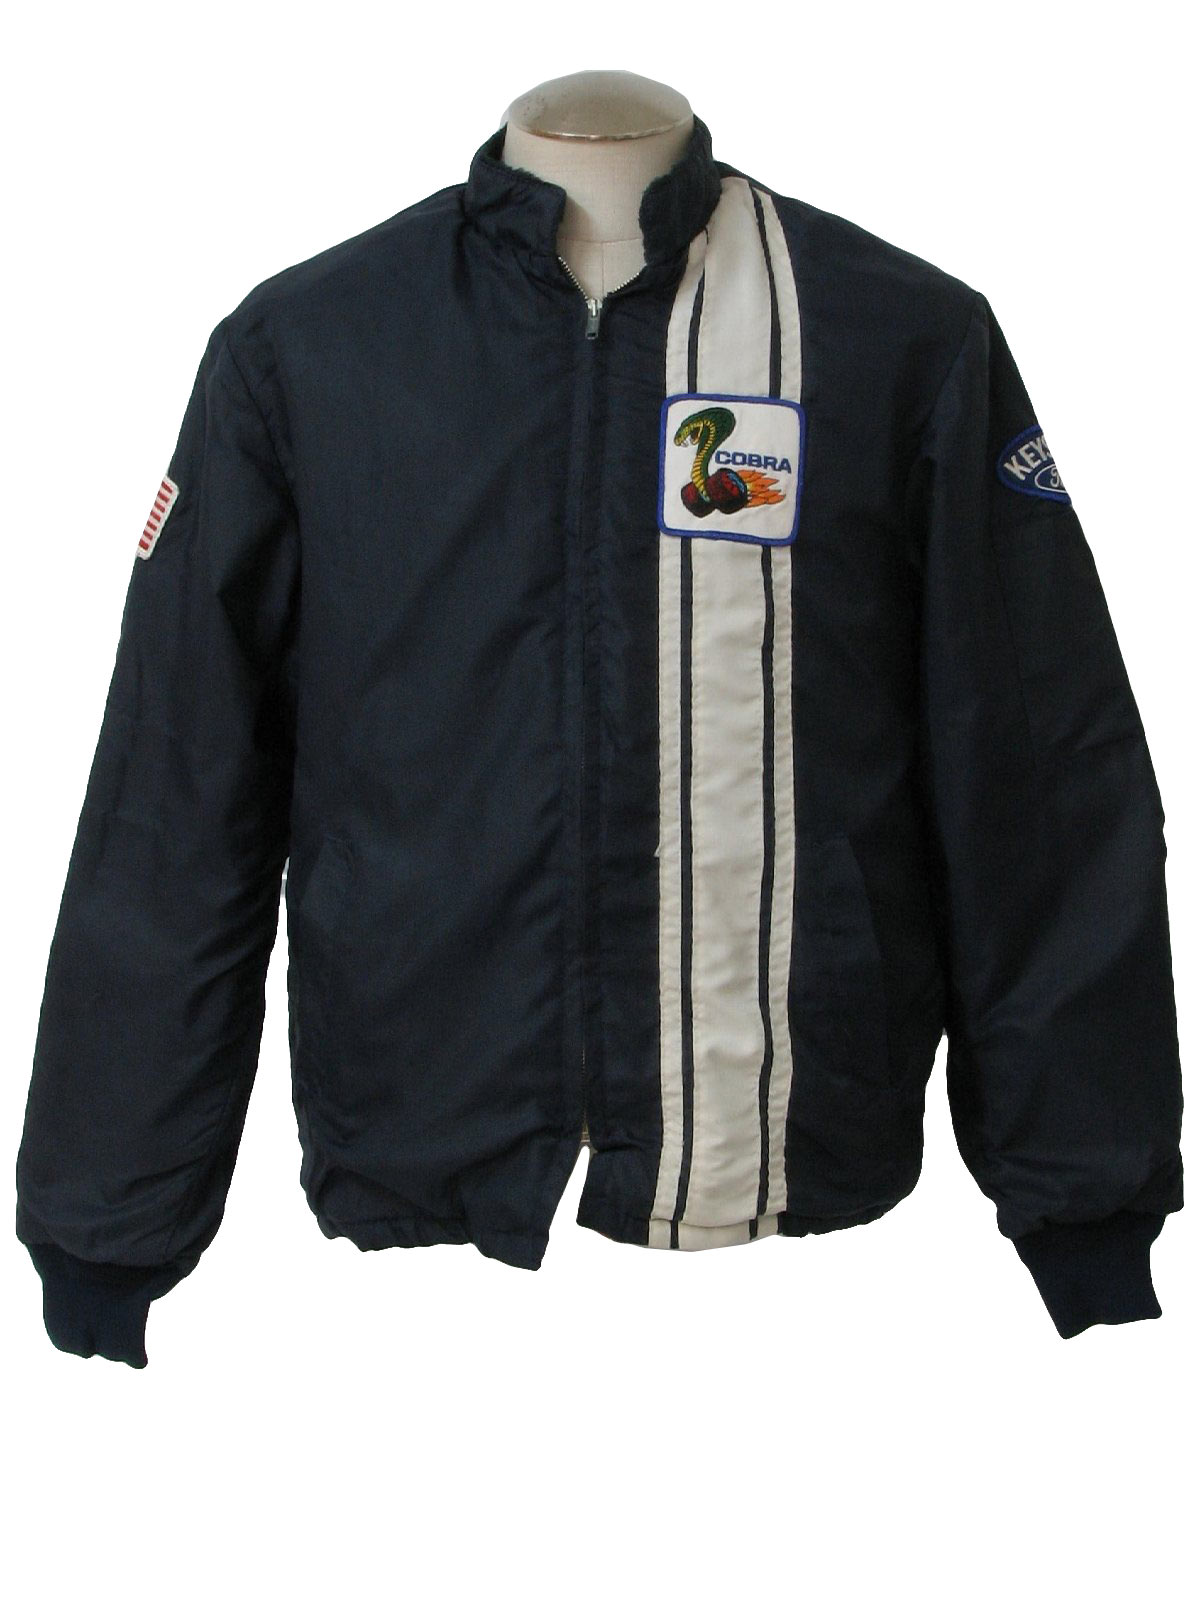 Ford racing jacket with cobra logo on it #2